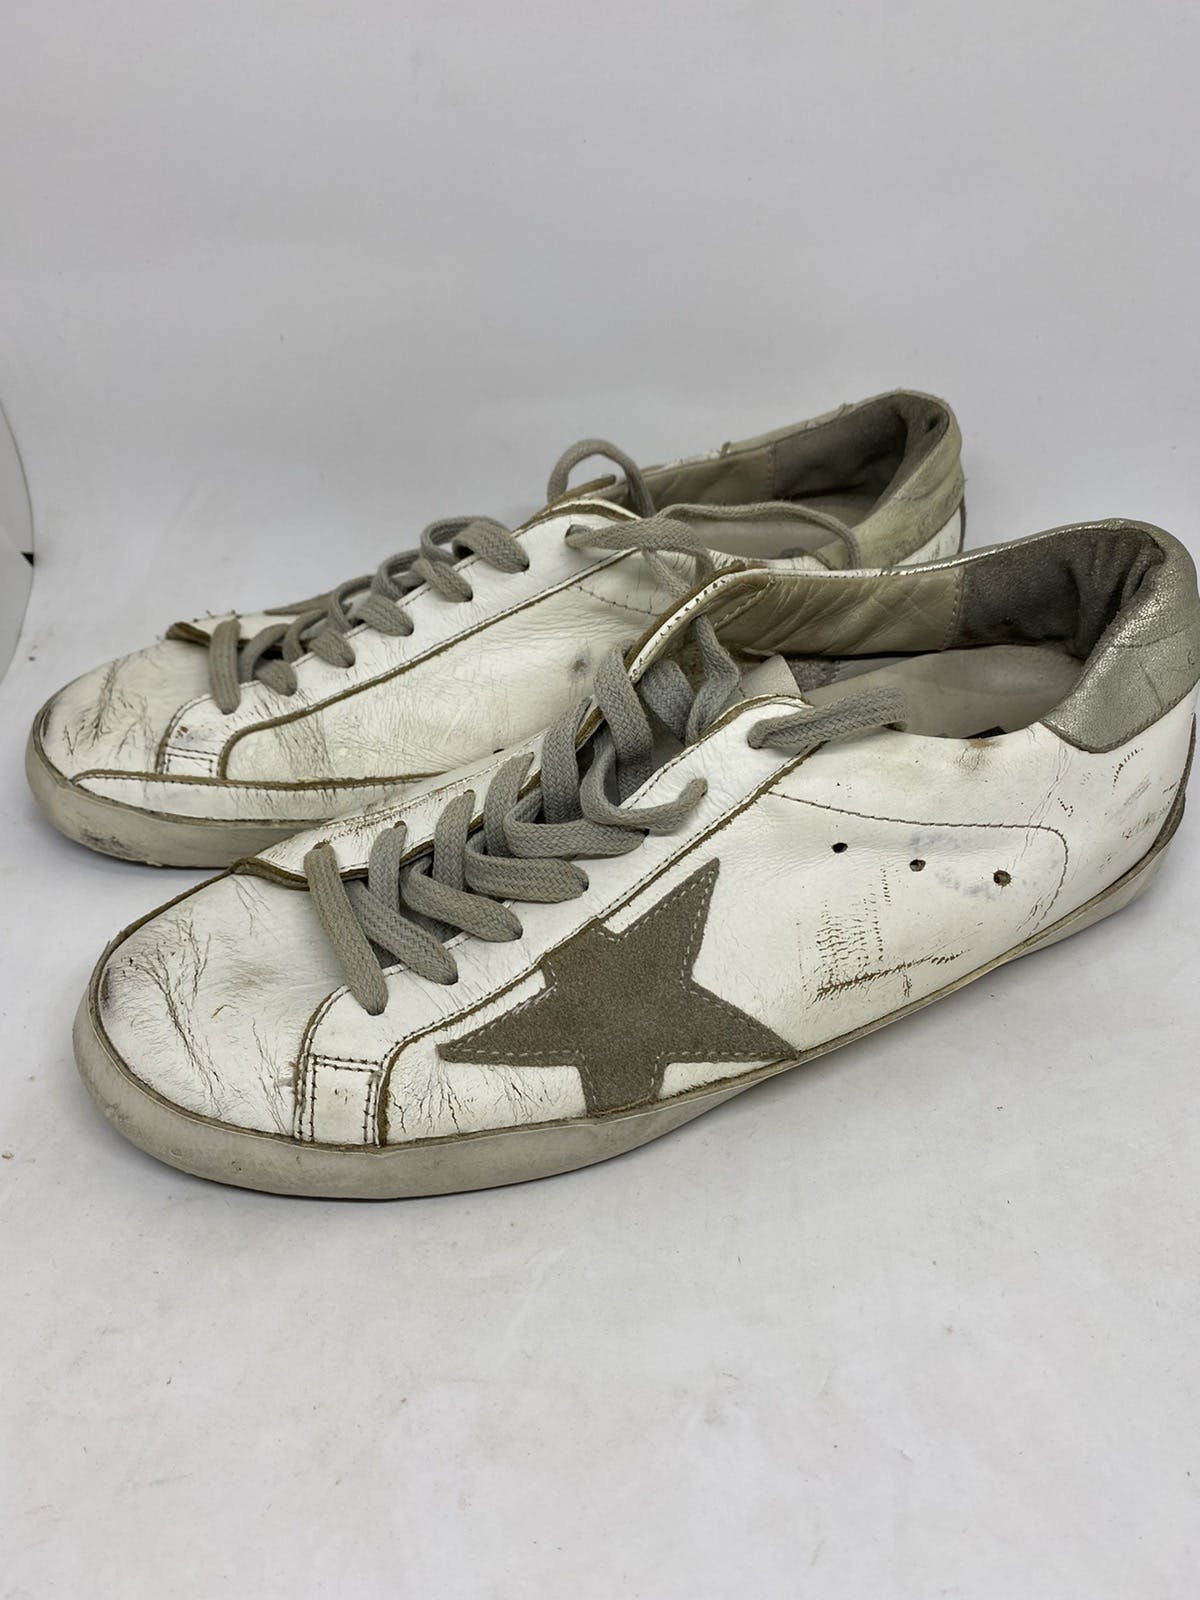 white silver ggdb superstar leather size 39 women or us9 - 3